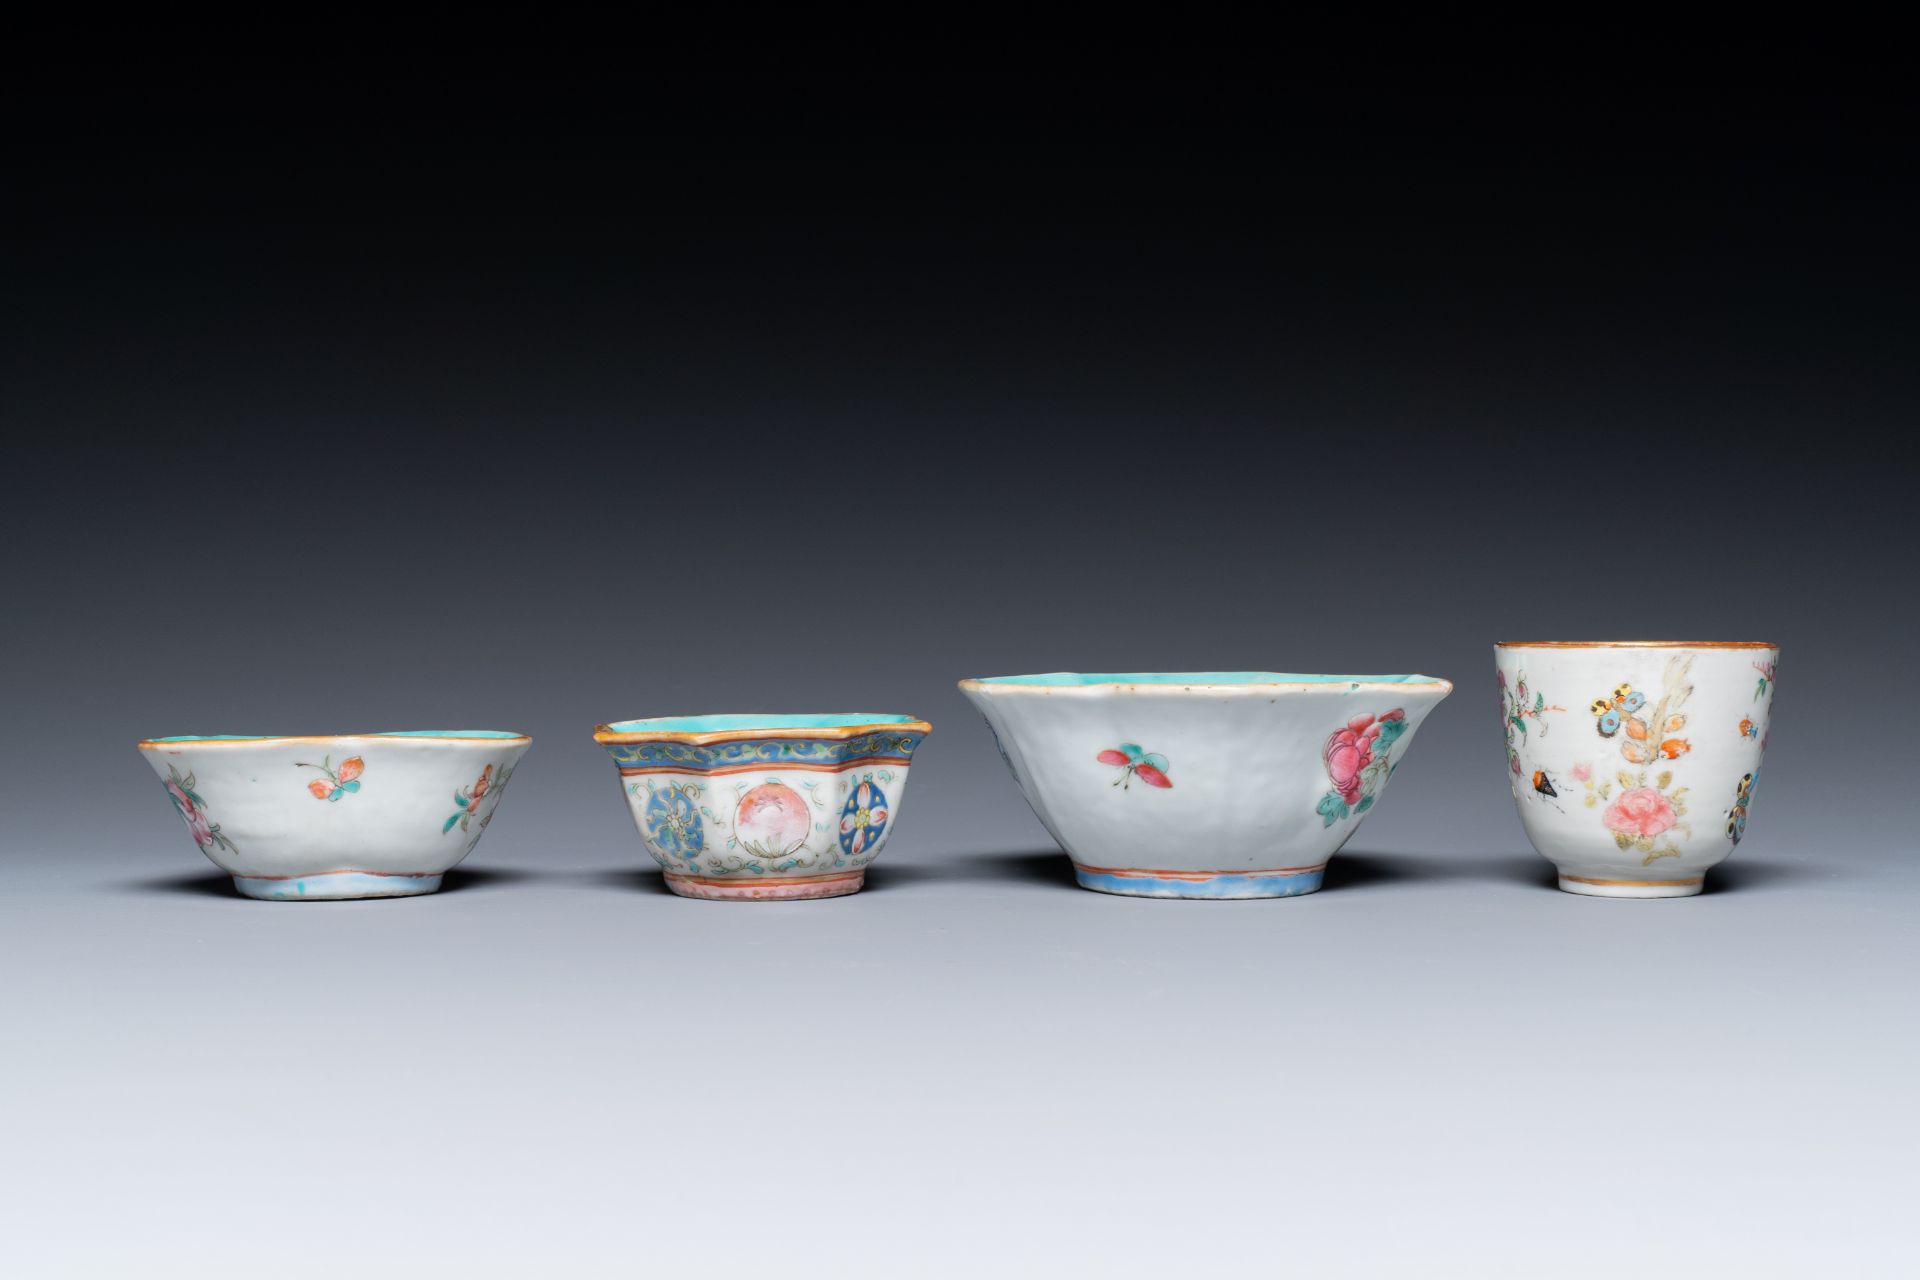 A varied collection of Chinese porcelain, 18/19th C. - Image 9 of 11